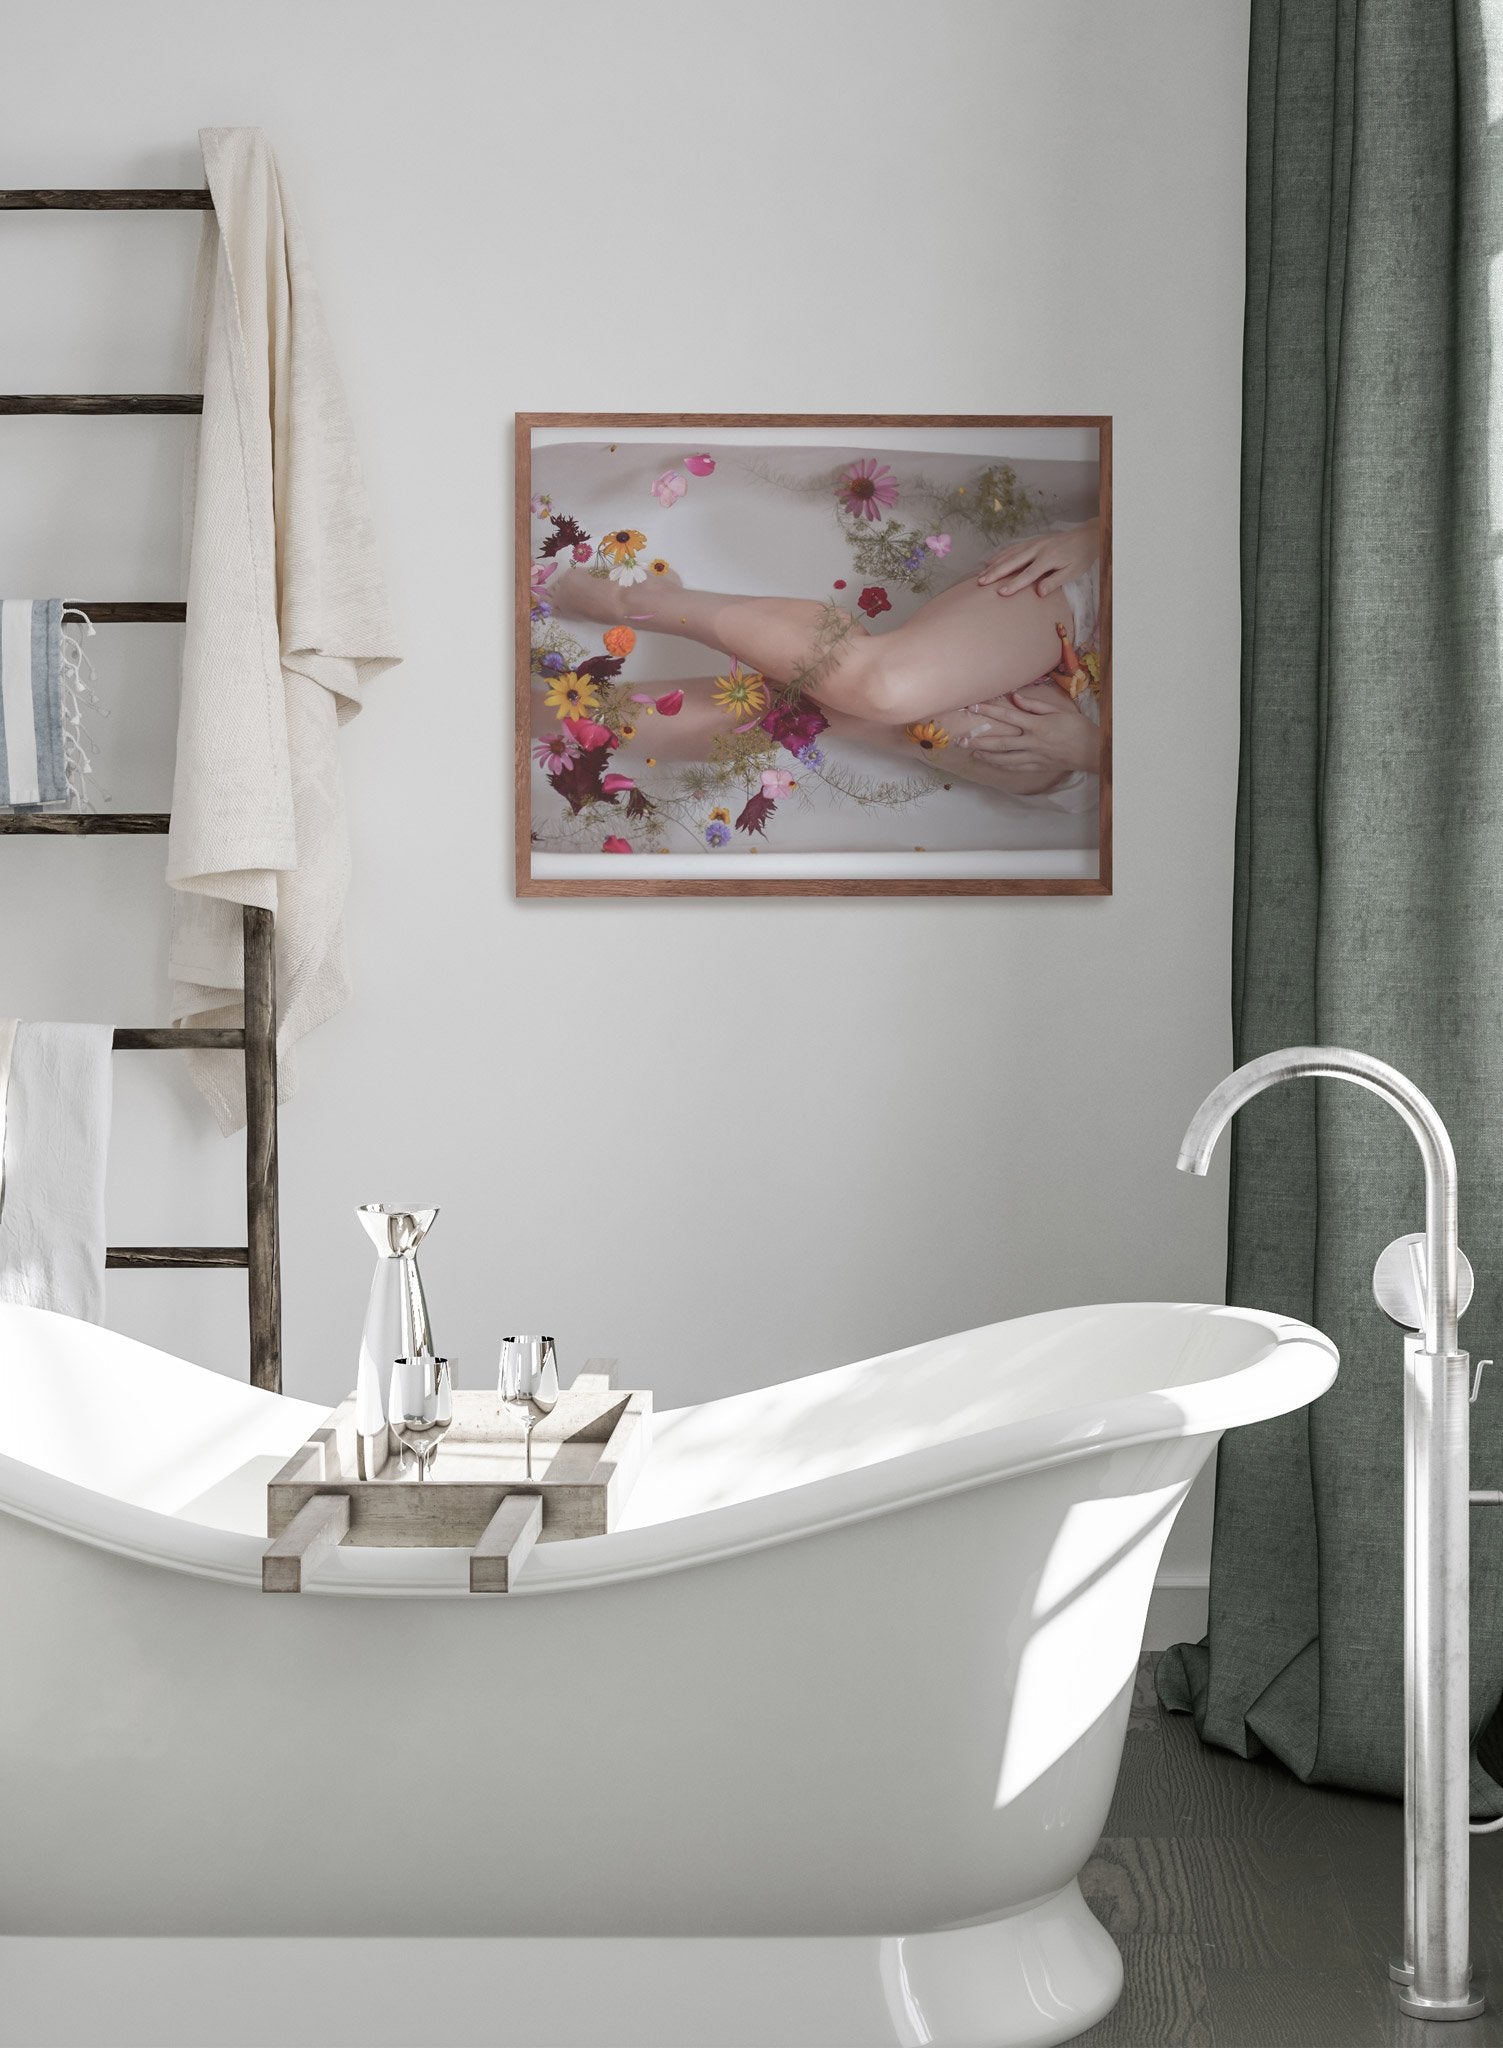 "Bloom Bath" is a minimalist photography poster by Opposite Wall of a woman sitting in a bath with bright multi colored flowers in yellow, pink and purple.